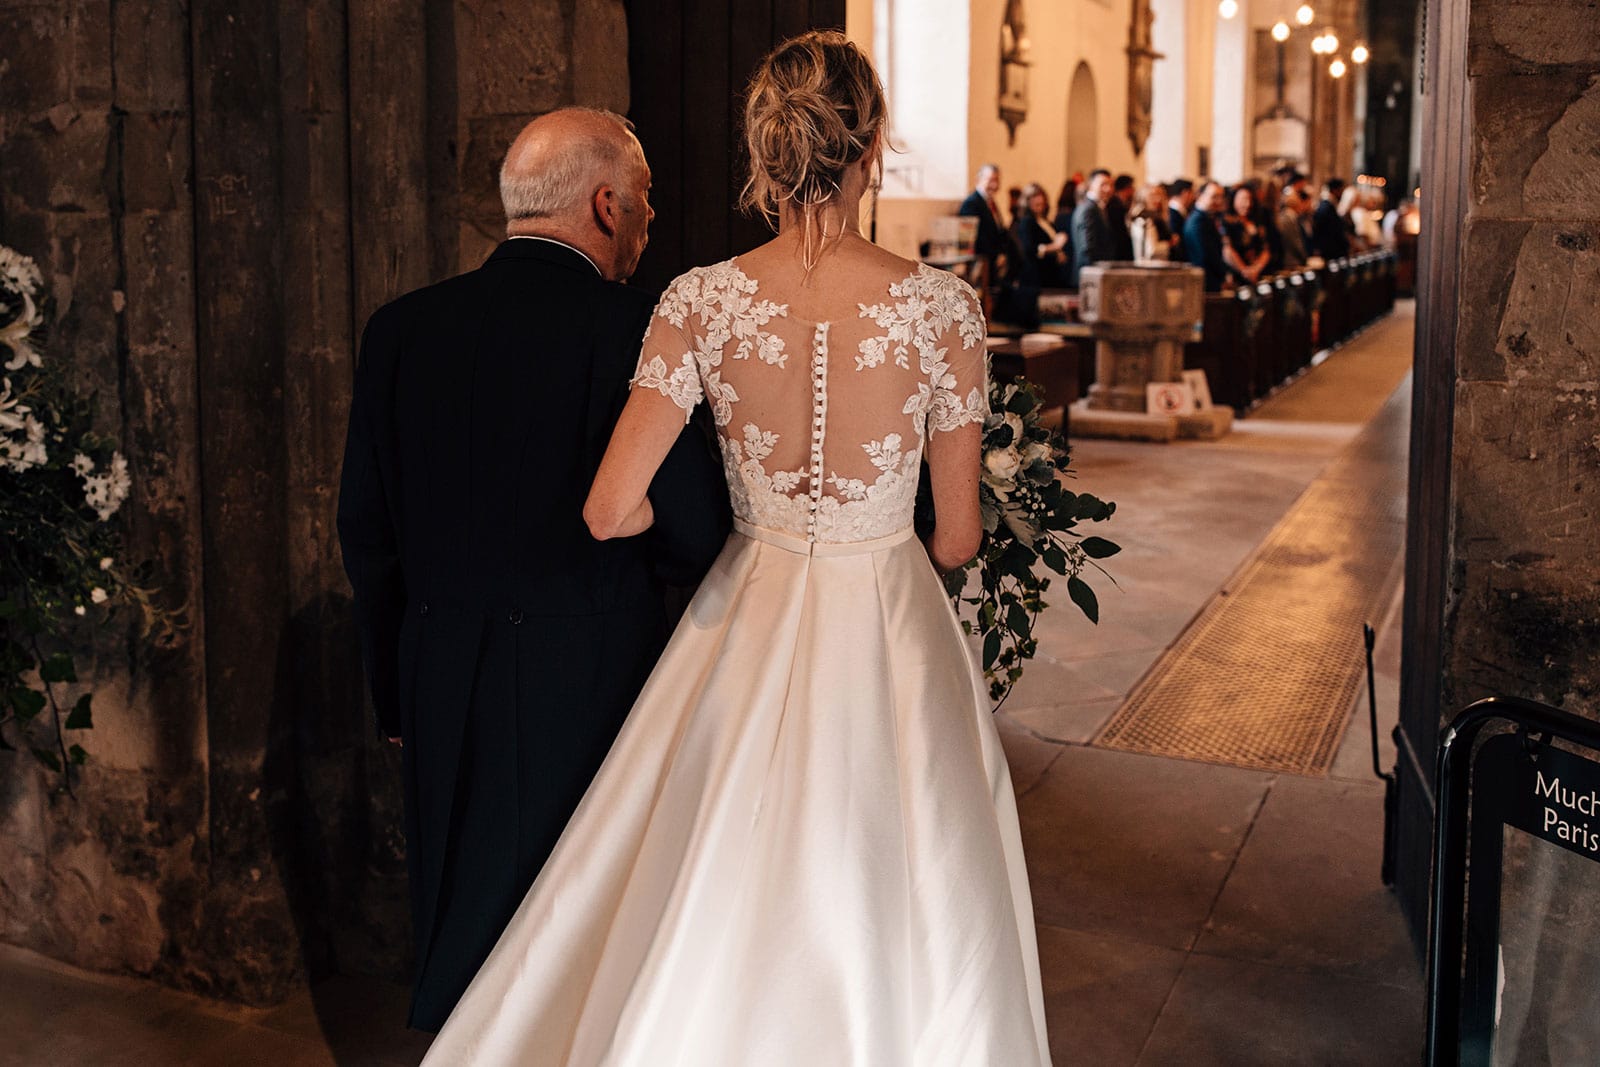 Documentary wedding photography of a bride and her father entering the church